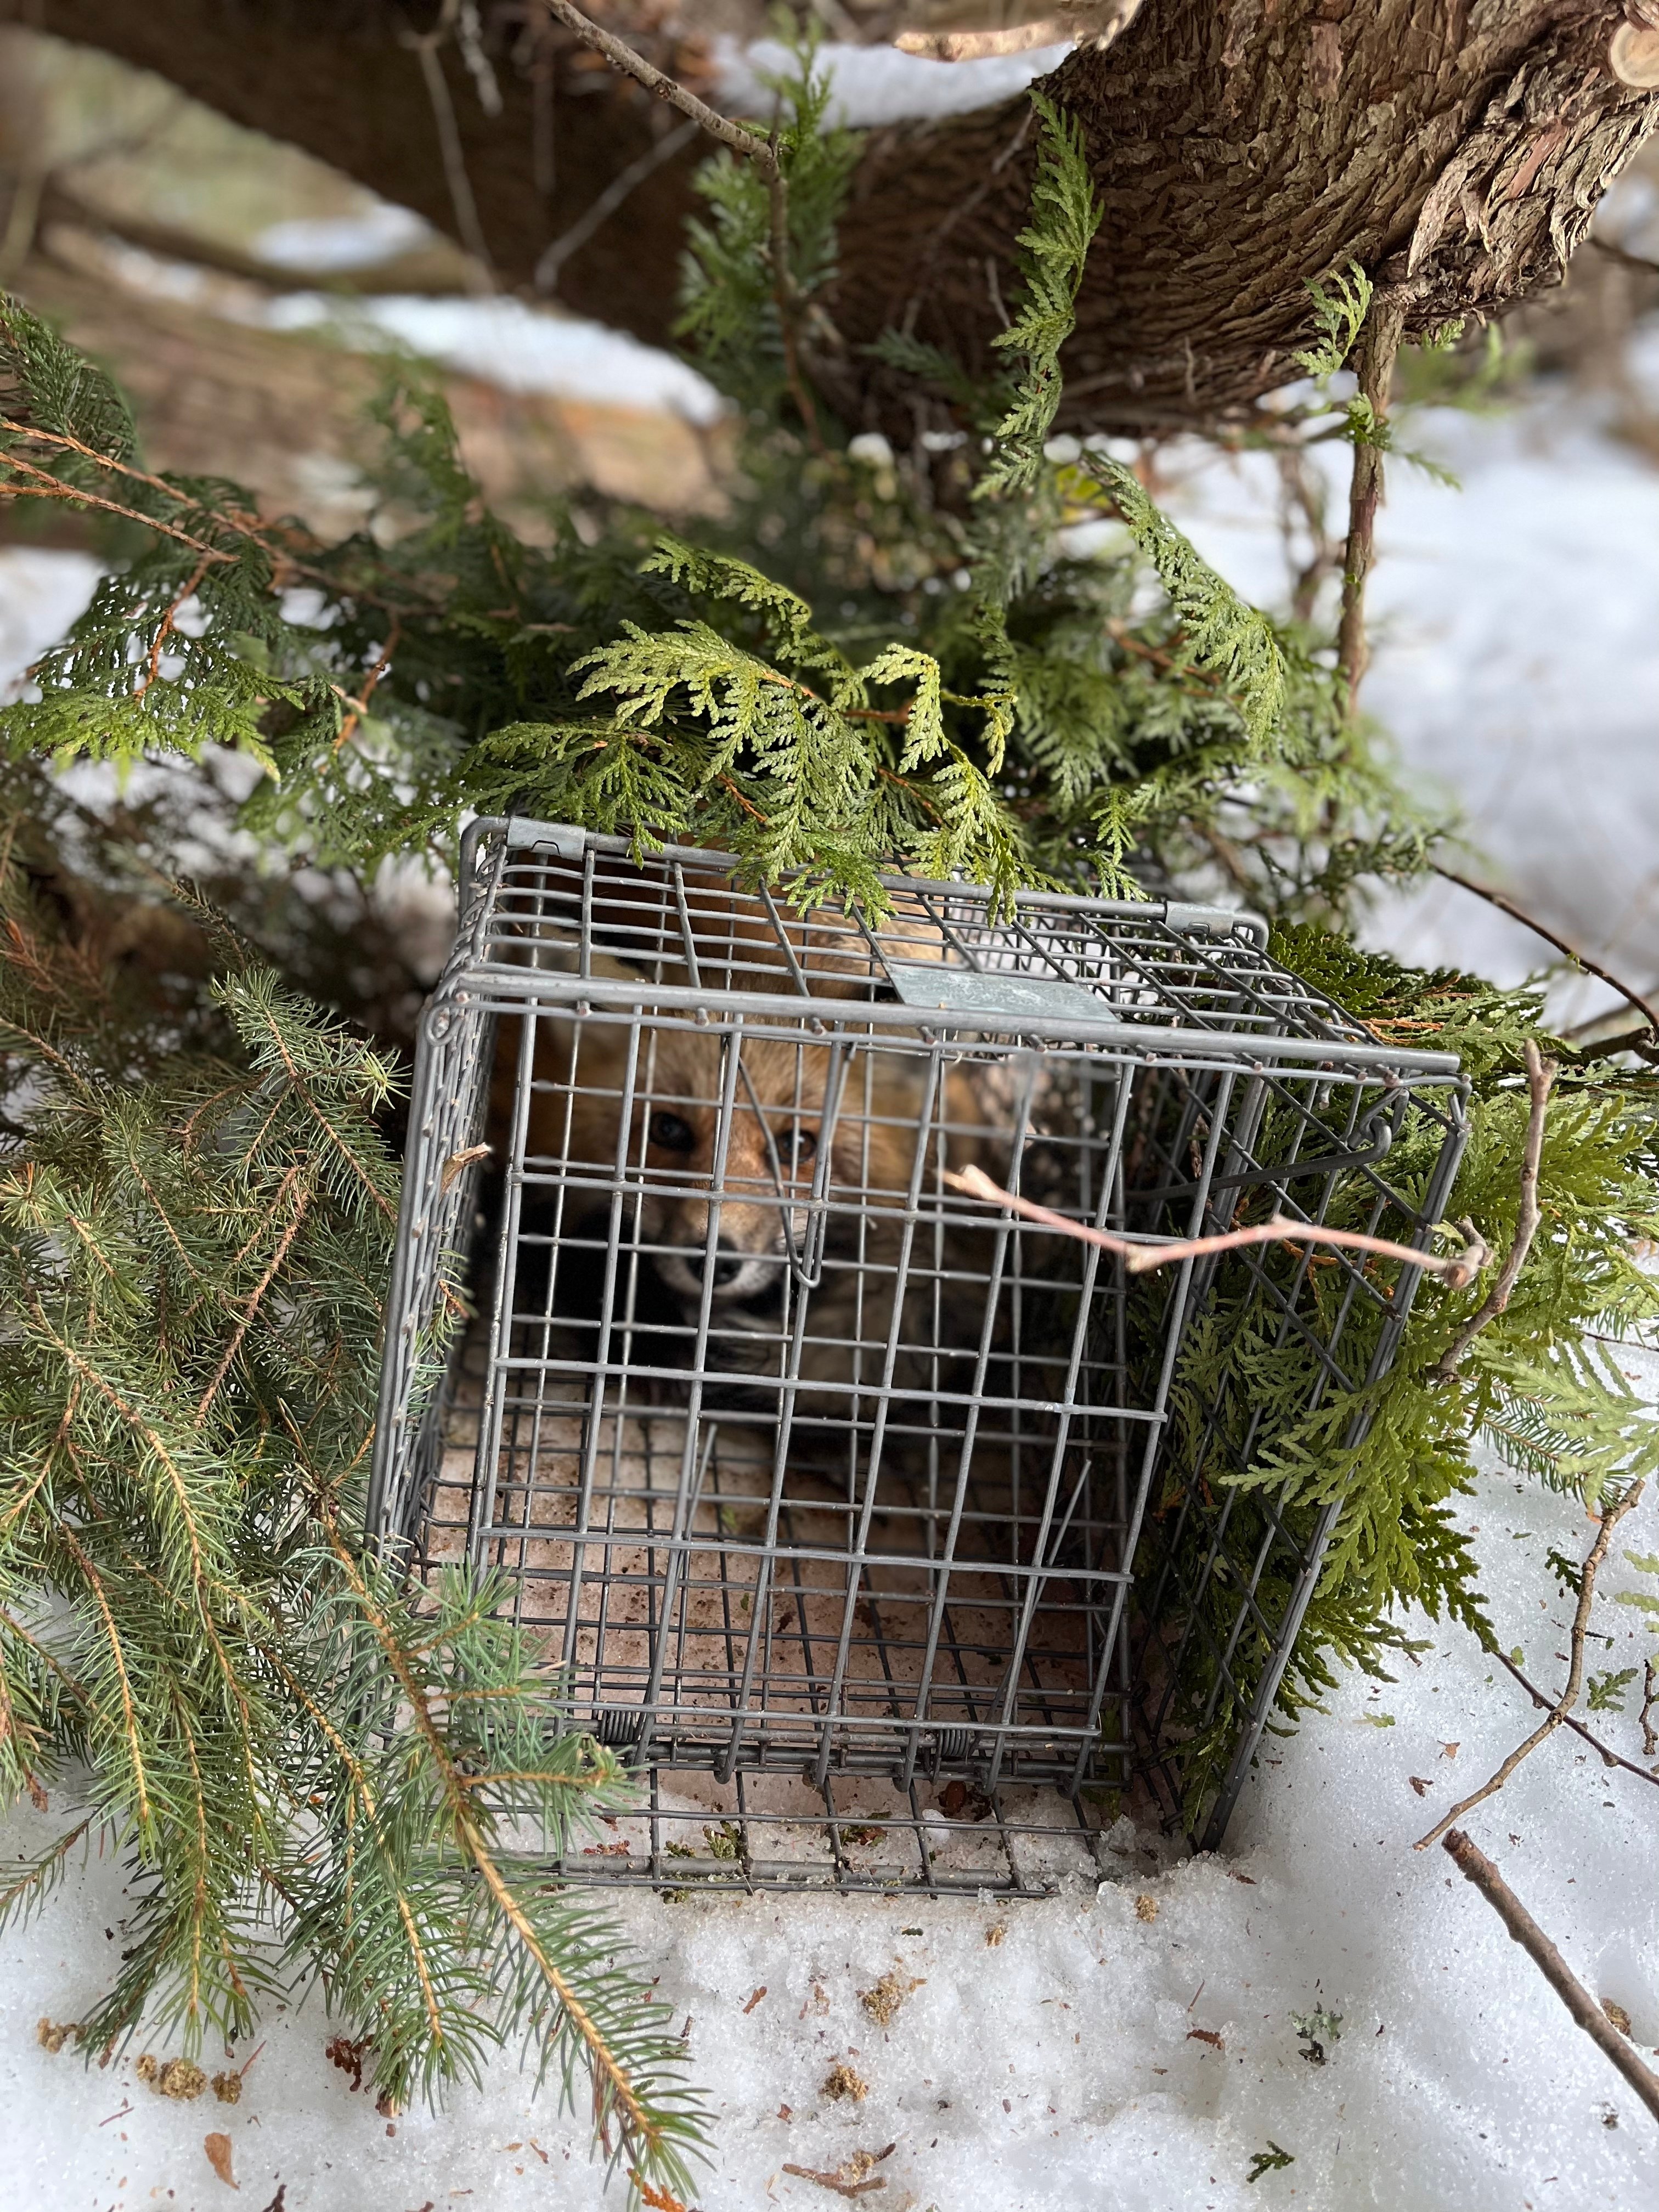 Red fox in a monitoring trap